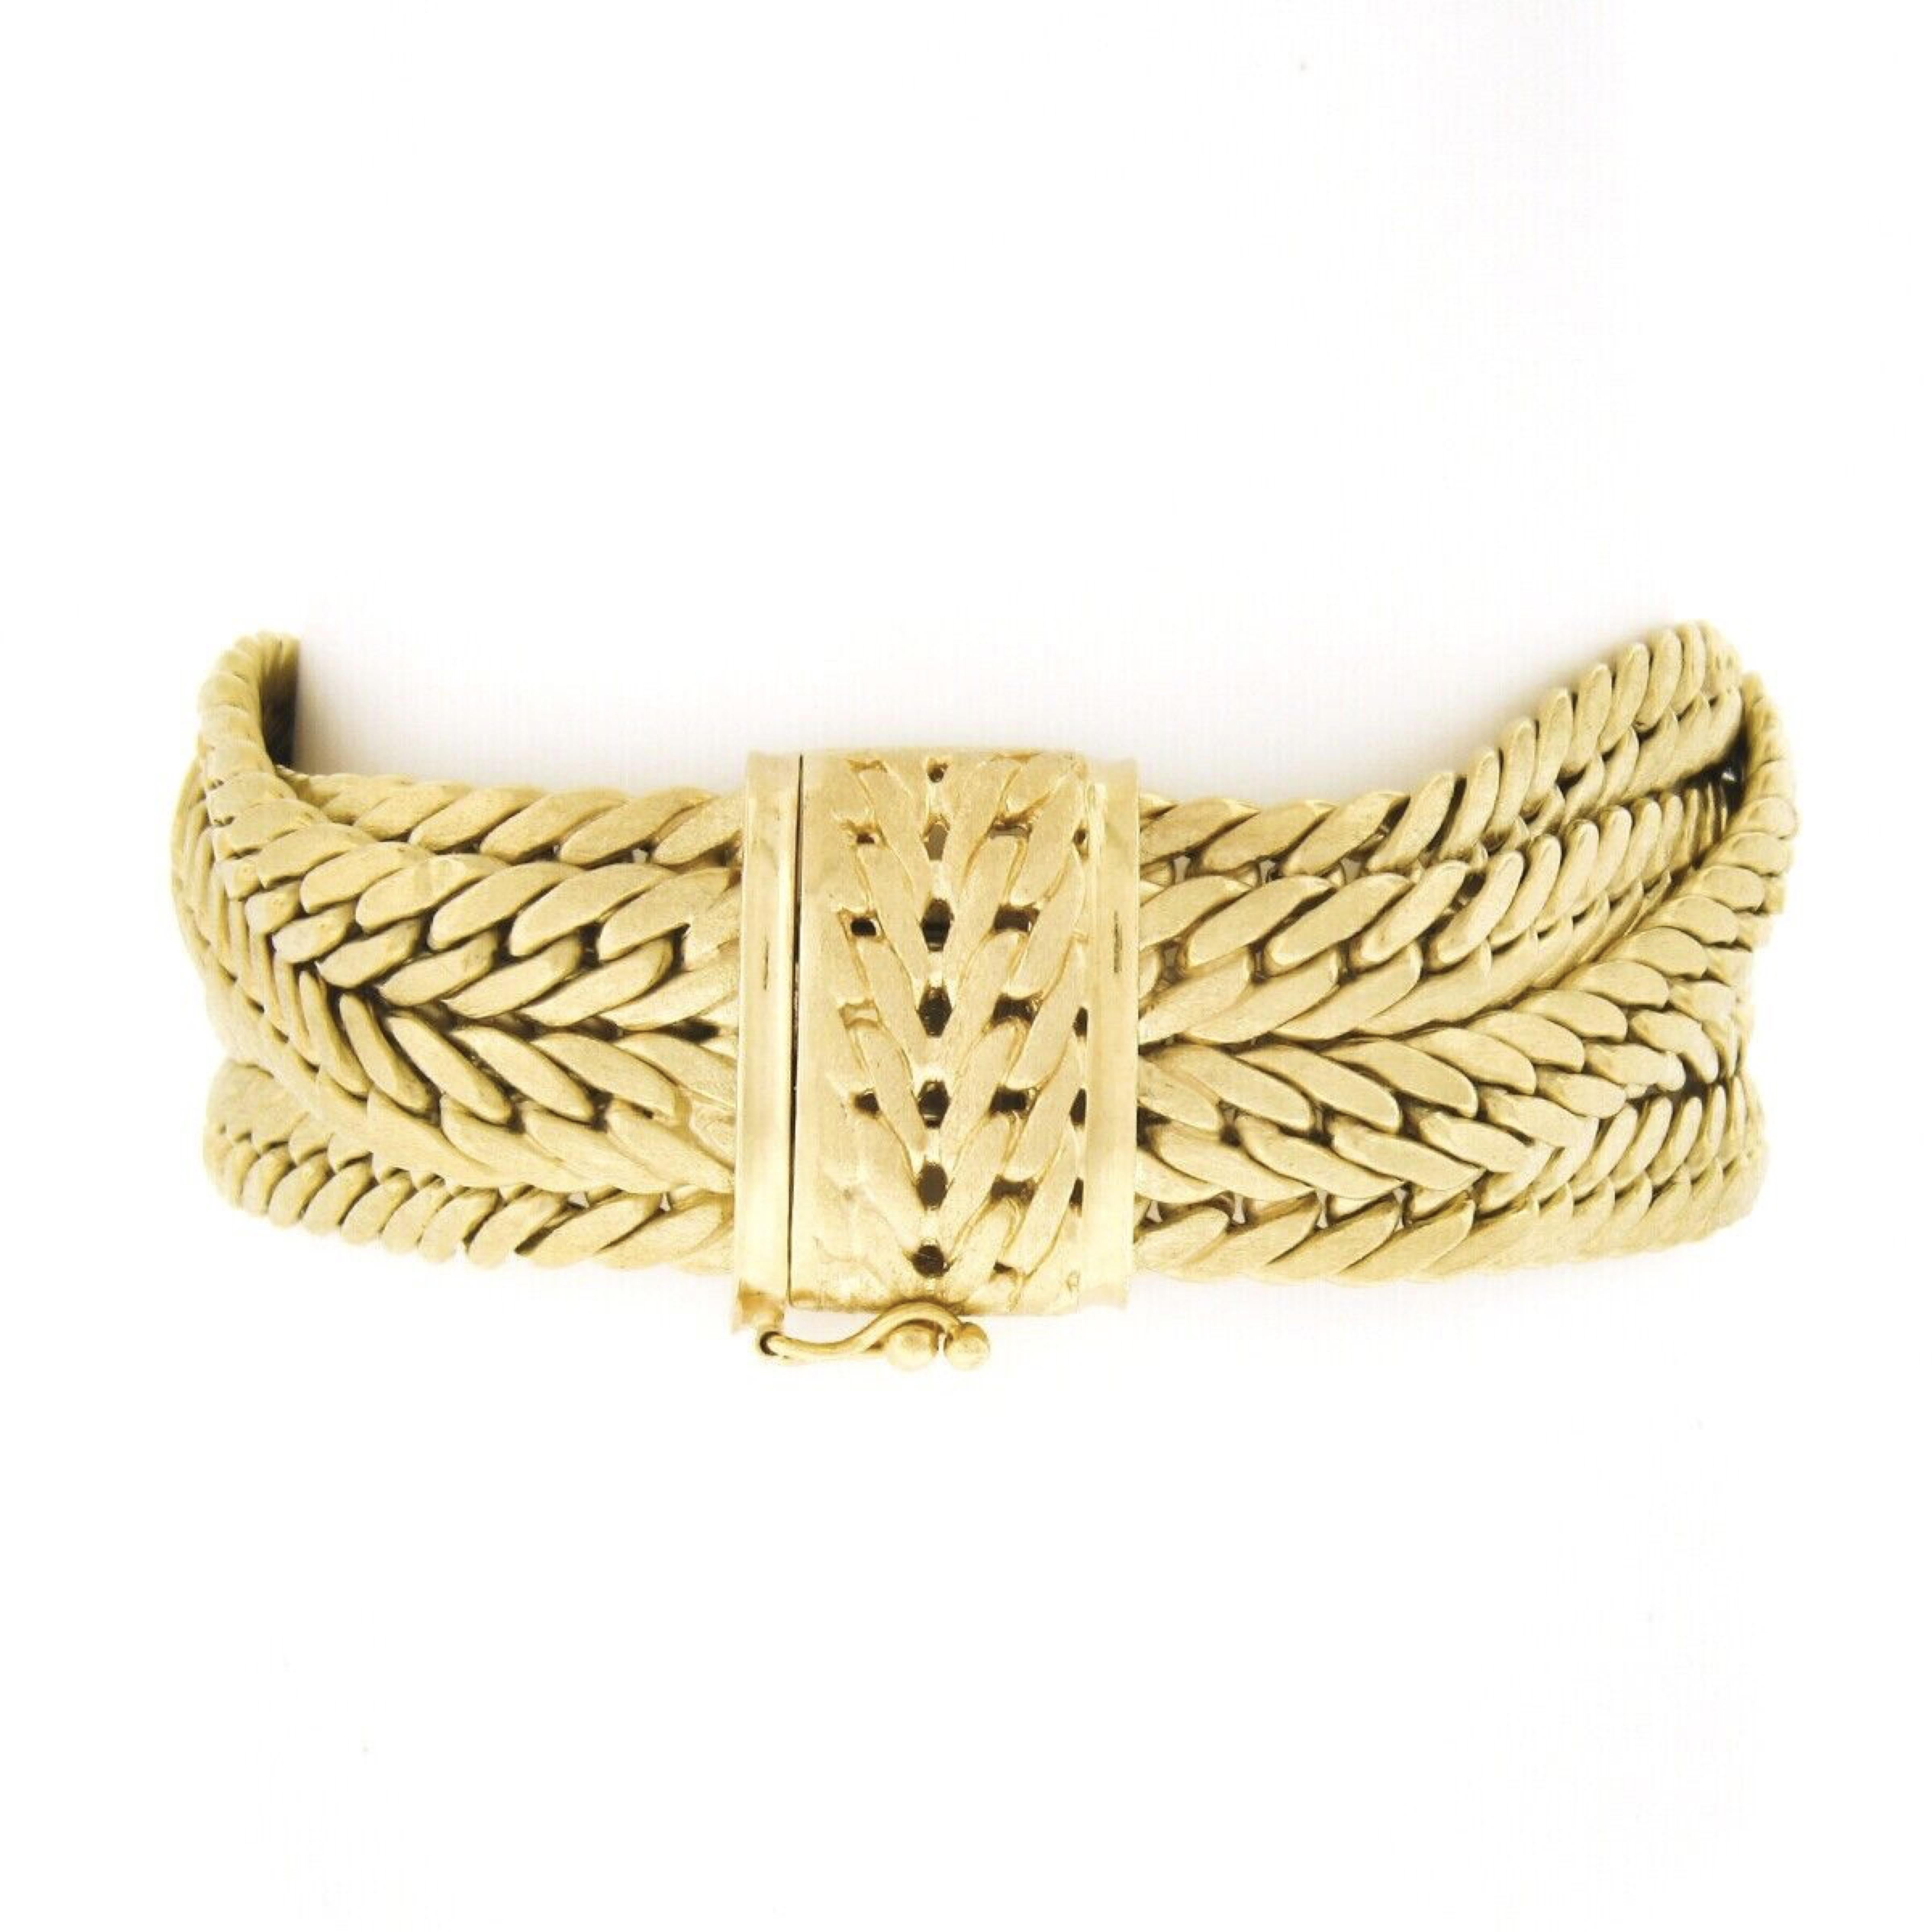 This outstanding and very well made bracelet was crafted in Italy from solid 18k yellow gold and designed by Brevetto. This wide bracelet is constructed from 5 rows of curb/Cuban link chains that have the most gorgeous brushed finish throughout